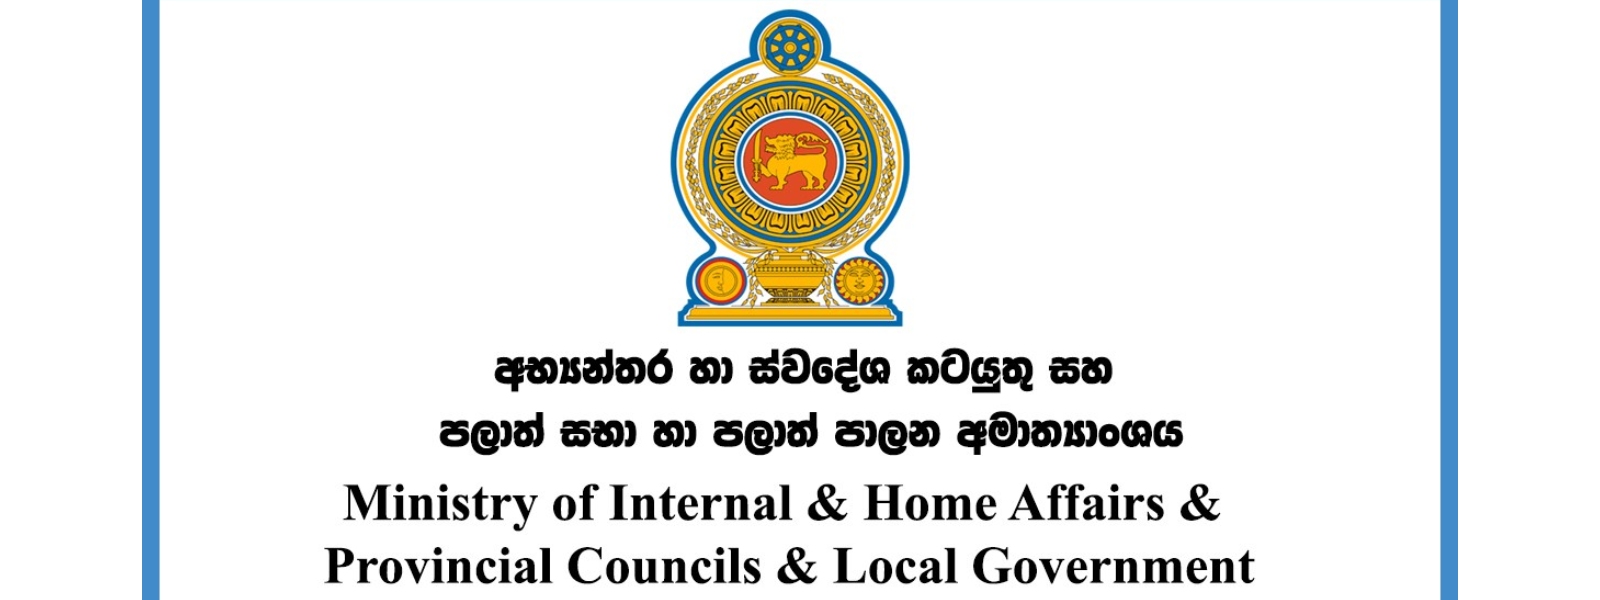 Today is NOT a government holiday: Ministry of Internal & Home Affairs